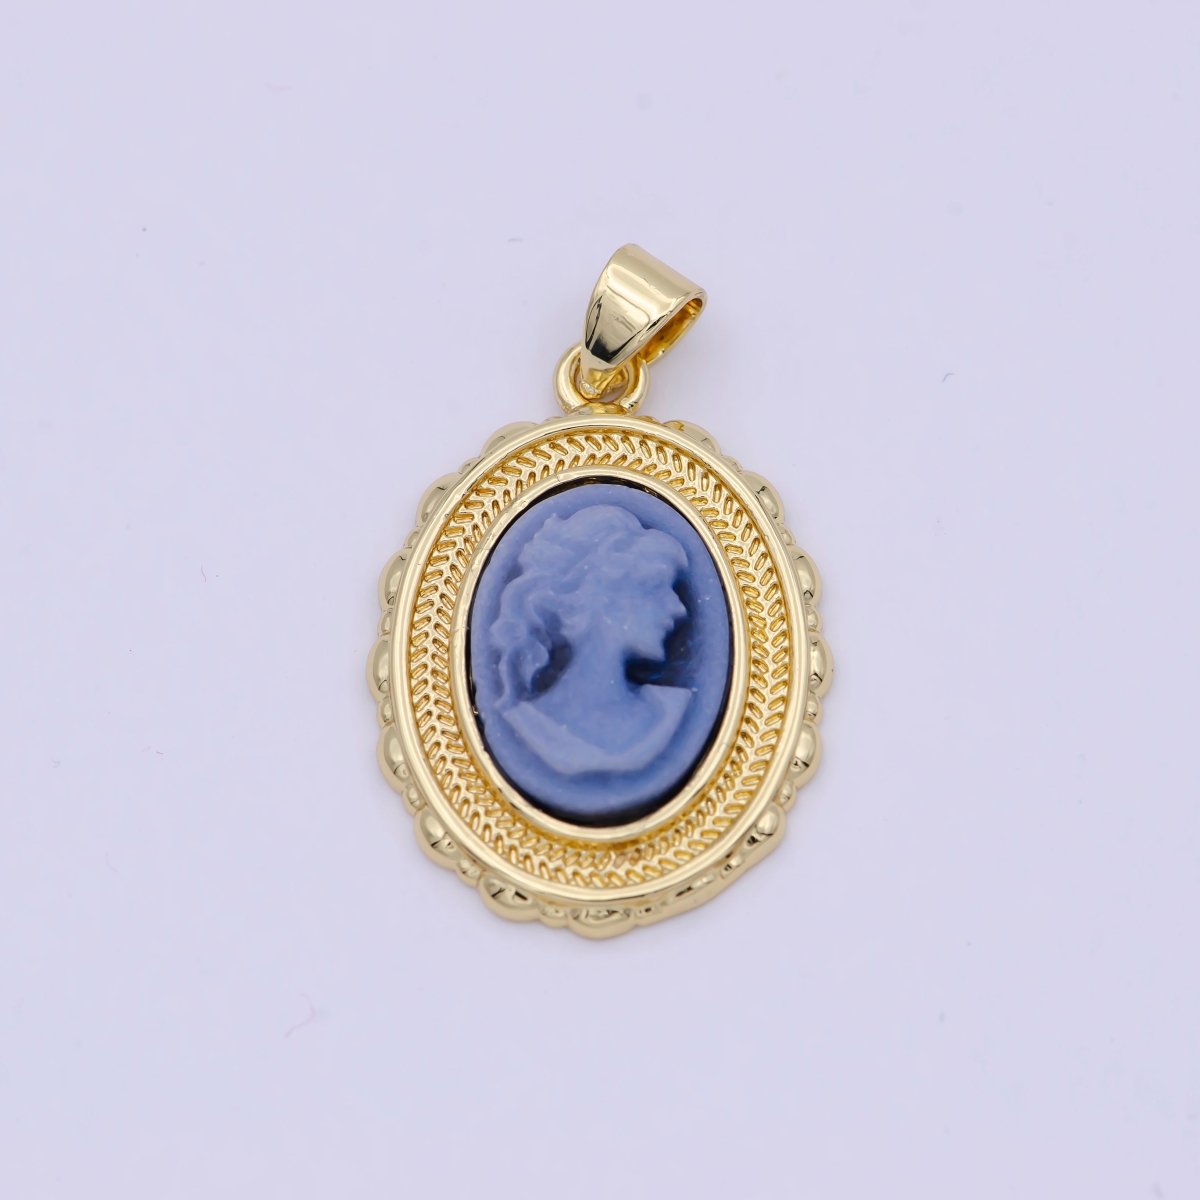 14K Gold Filled Natural Blue Agate Women's Portrait Italian Cameo Vintage Jewelry Oval Pendant N-585 - DLUXCA